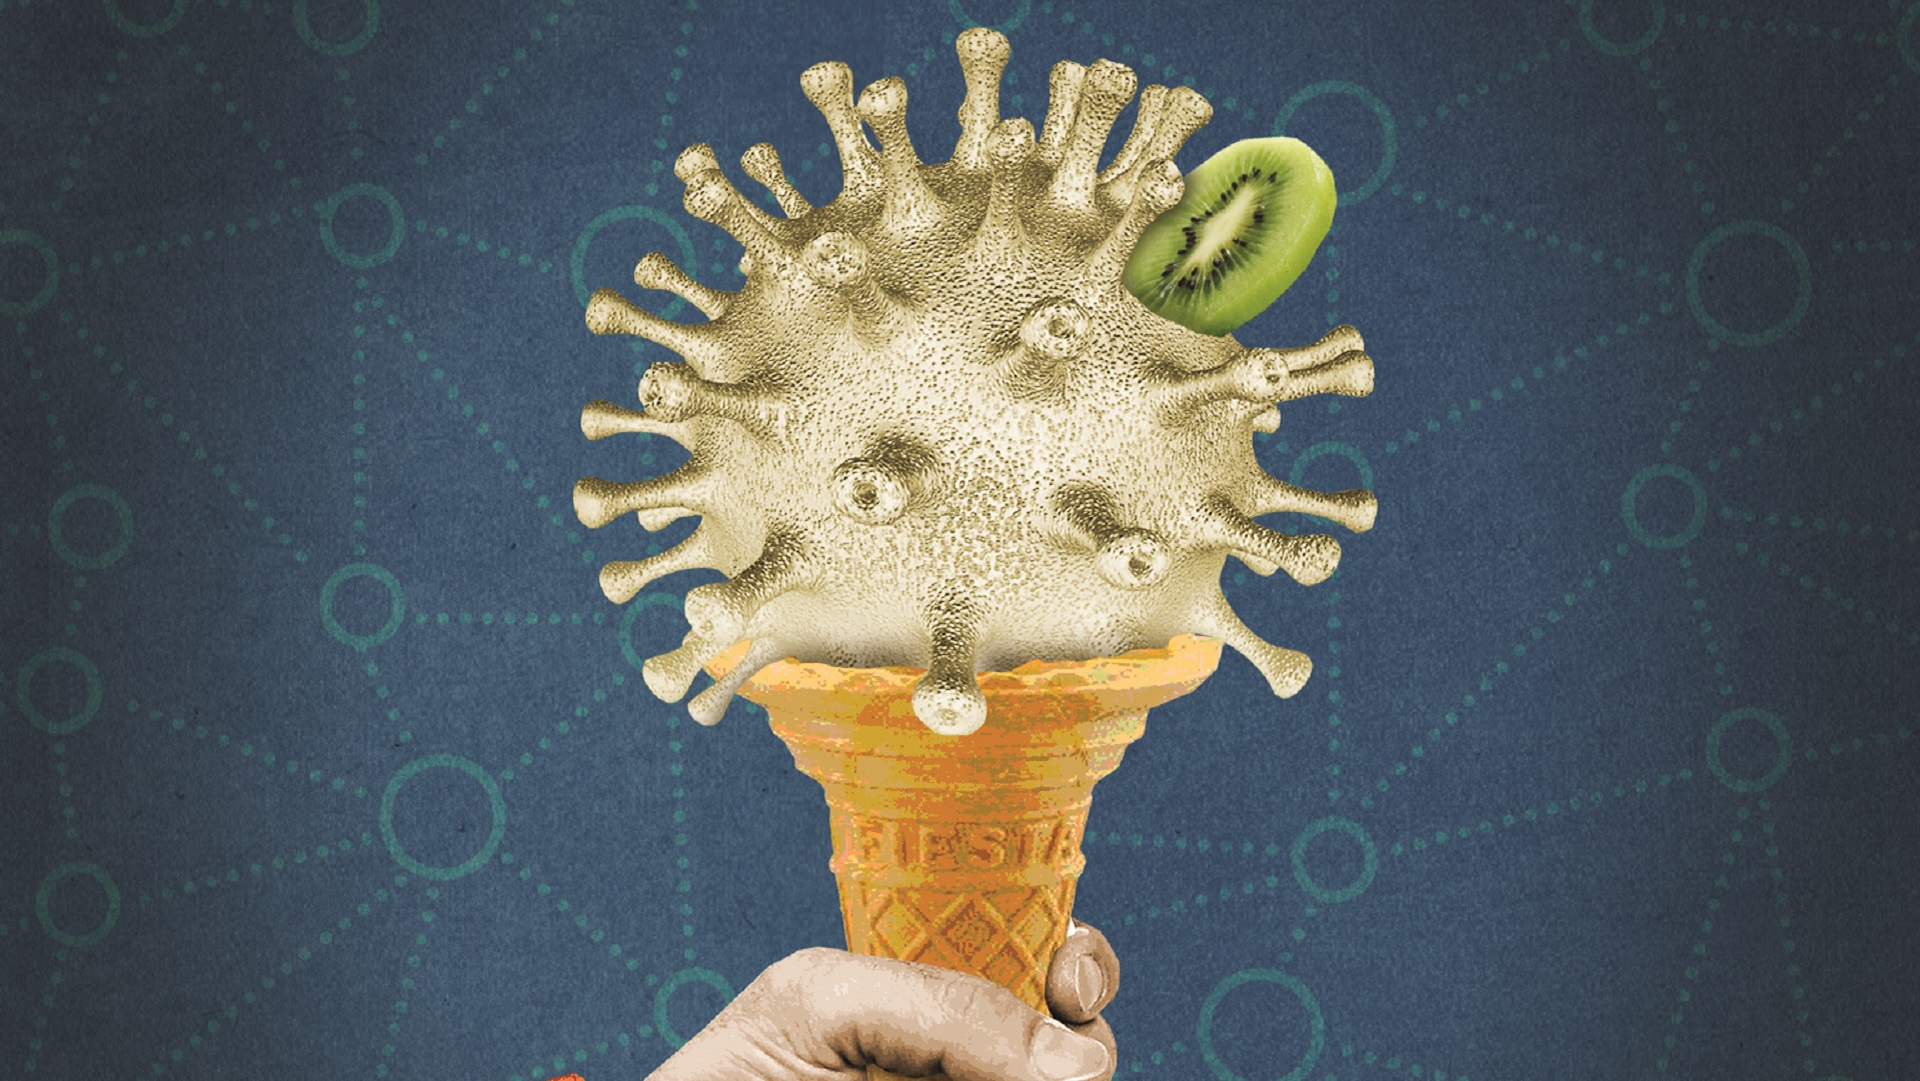 Coca Cola, kiwi fruits and ice cream have all recorded positive Covid-19 tests